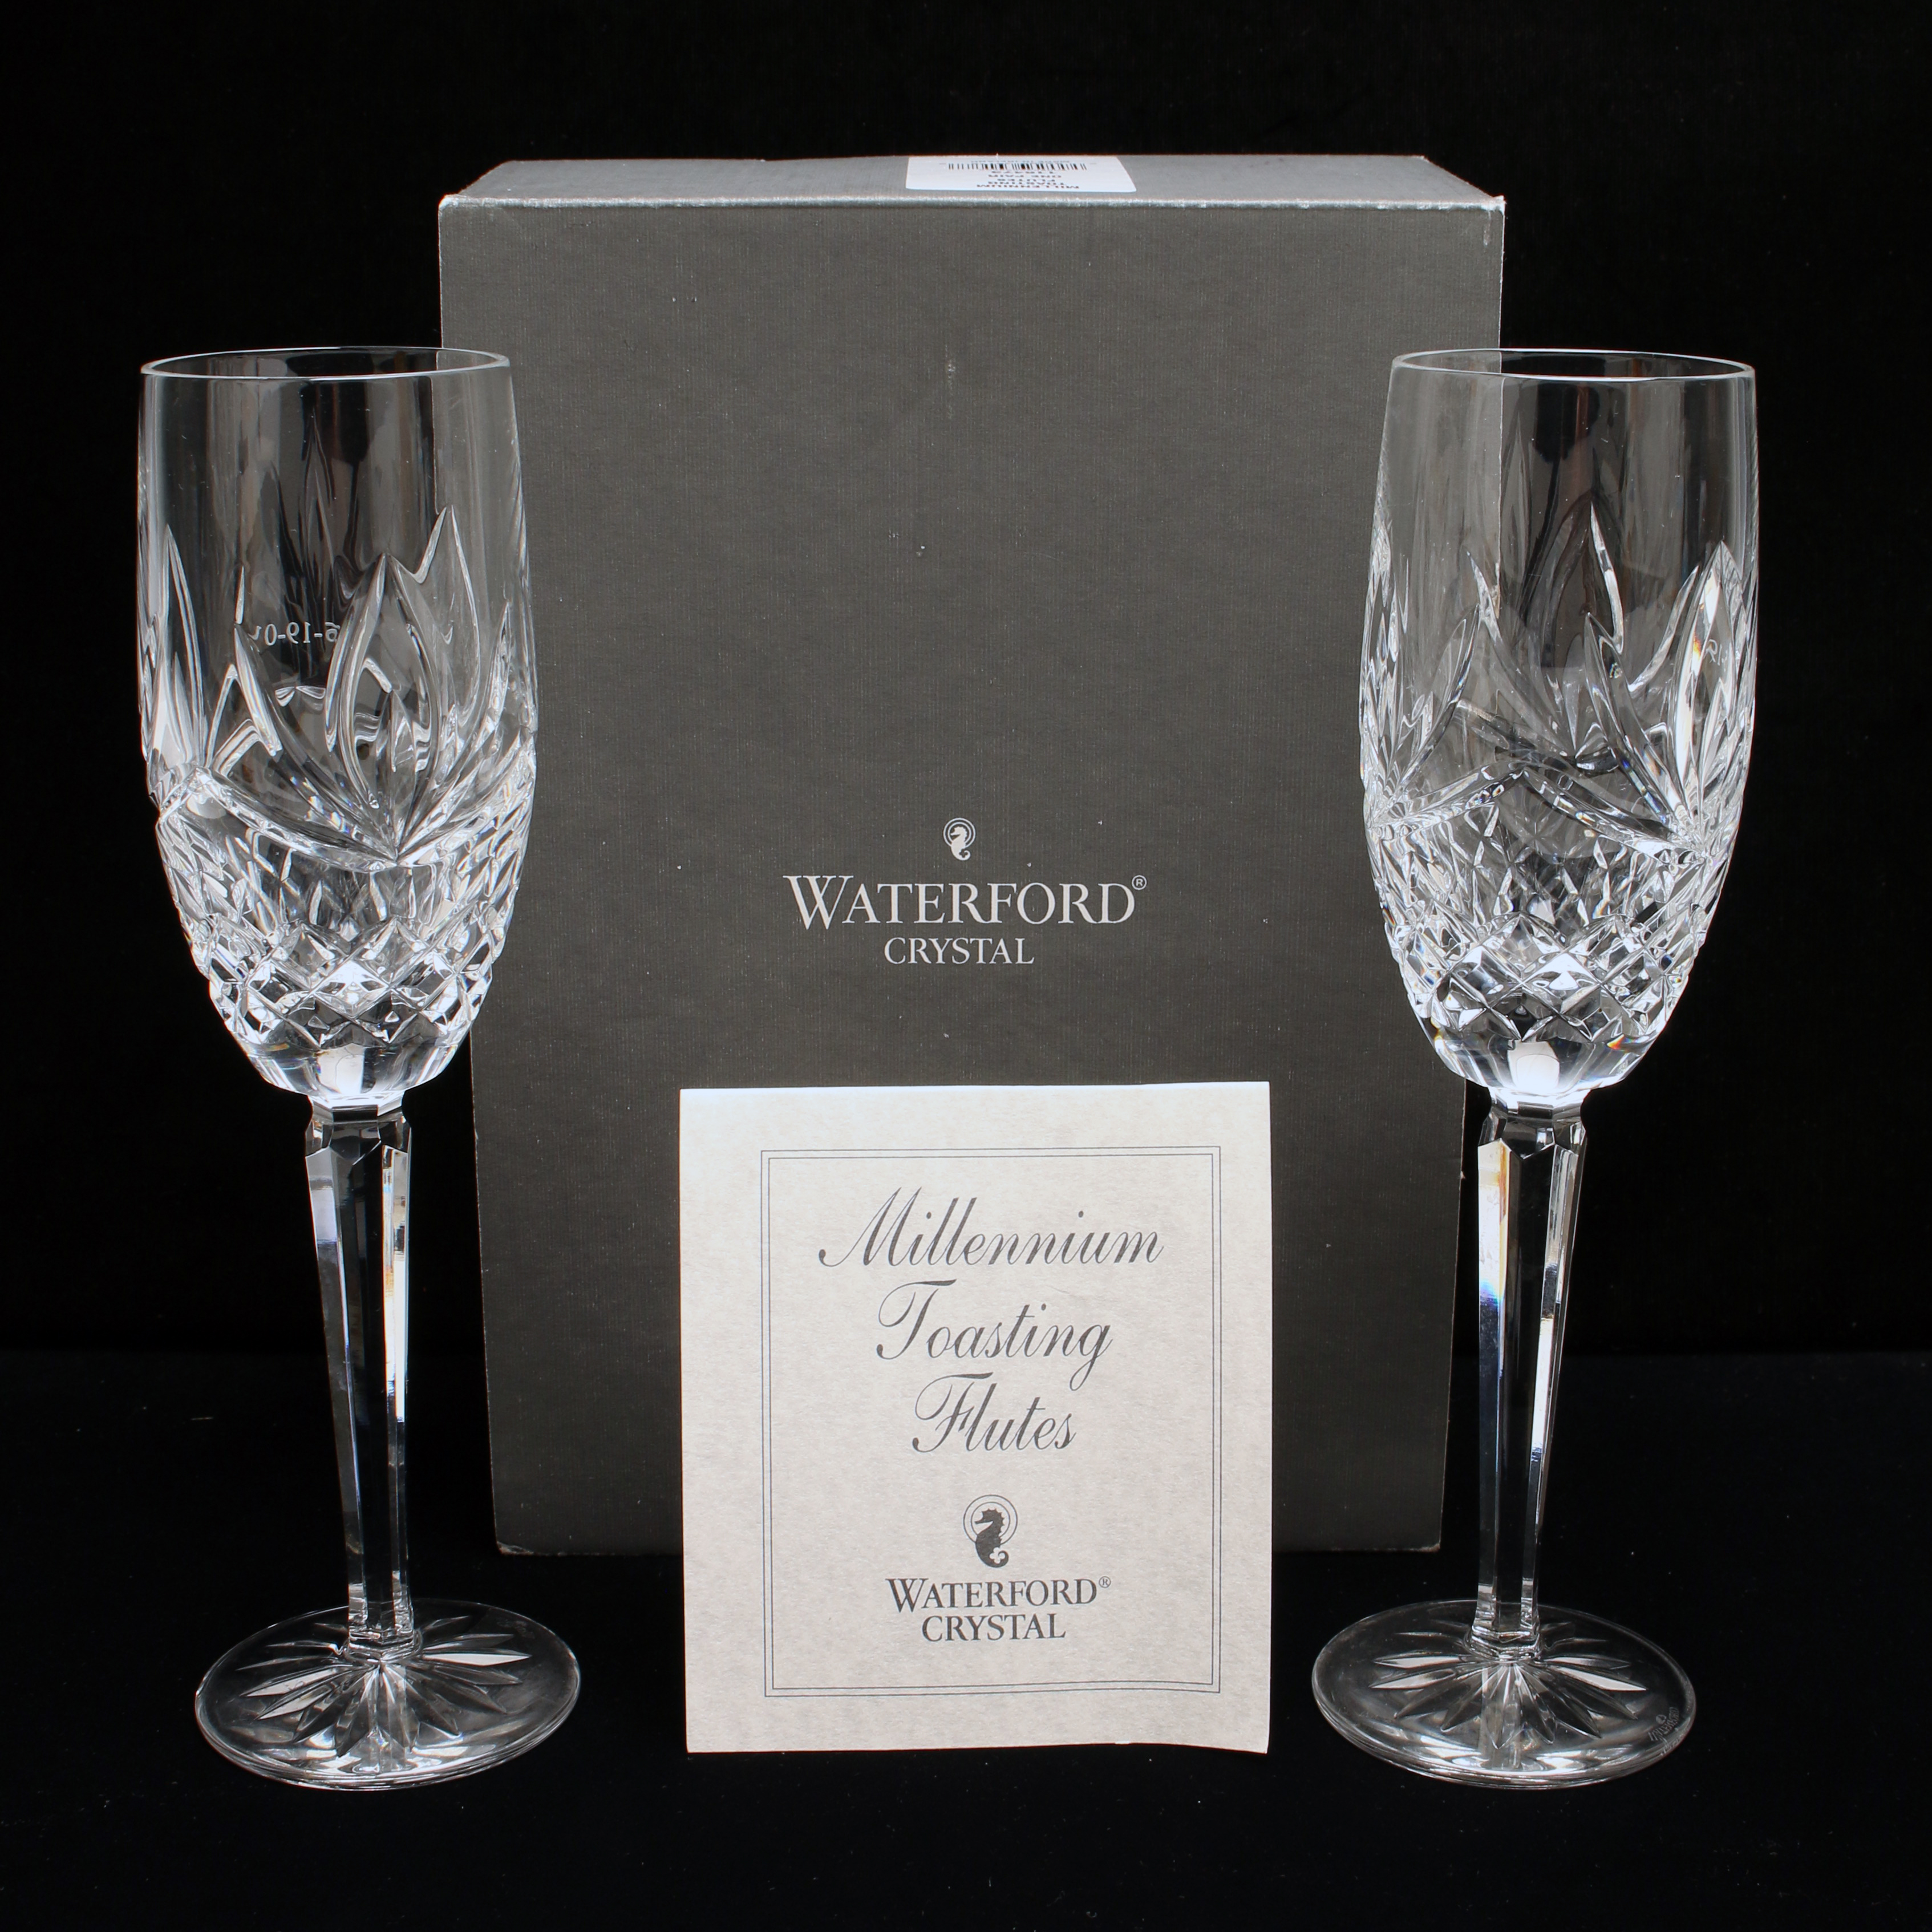 Waterford Crystal Millennium Toasting Flutes In Box image 1